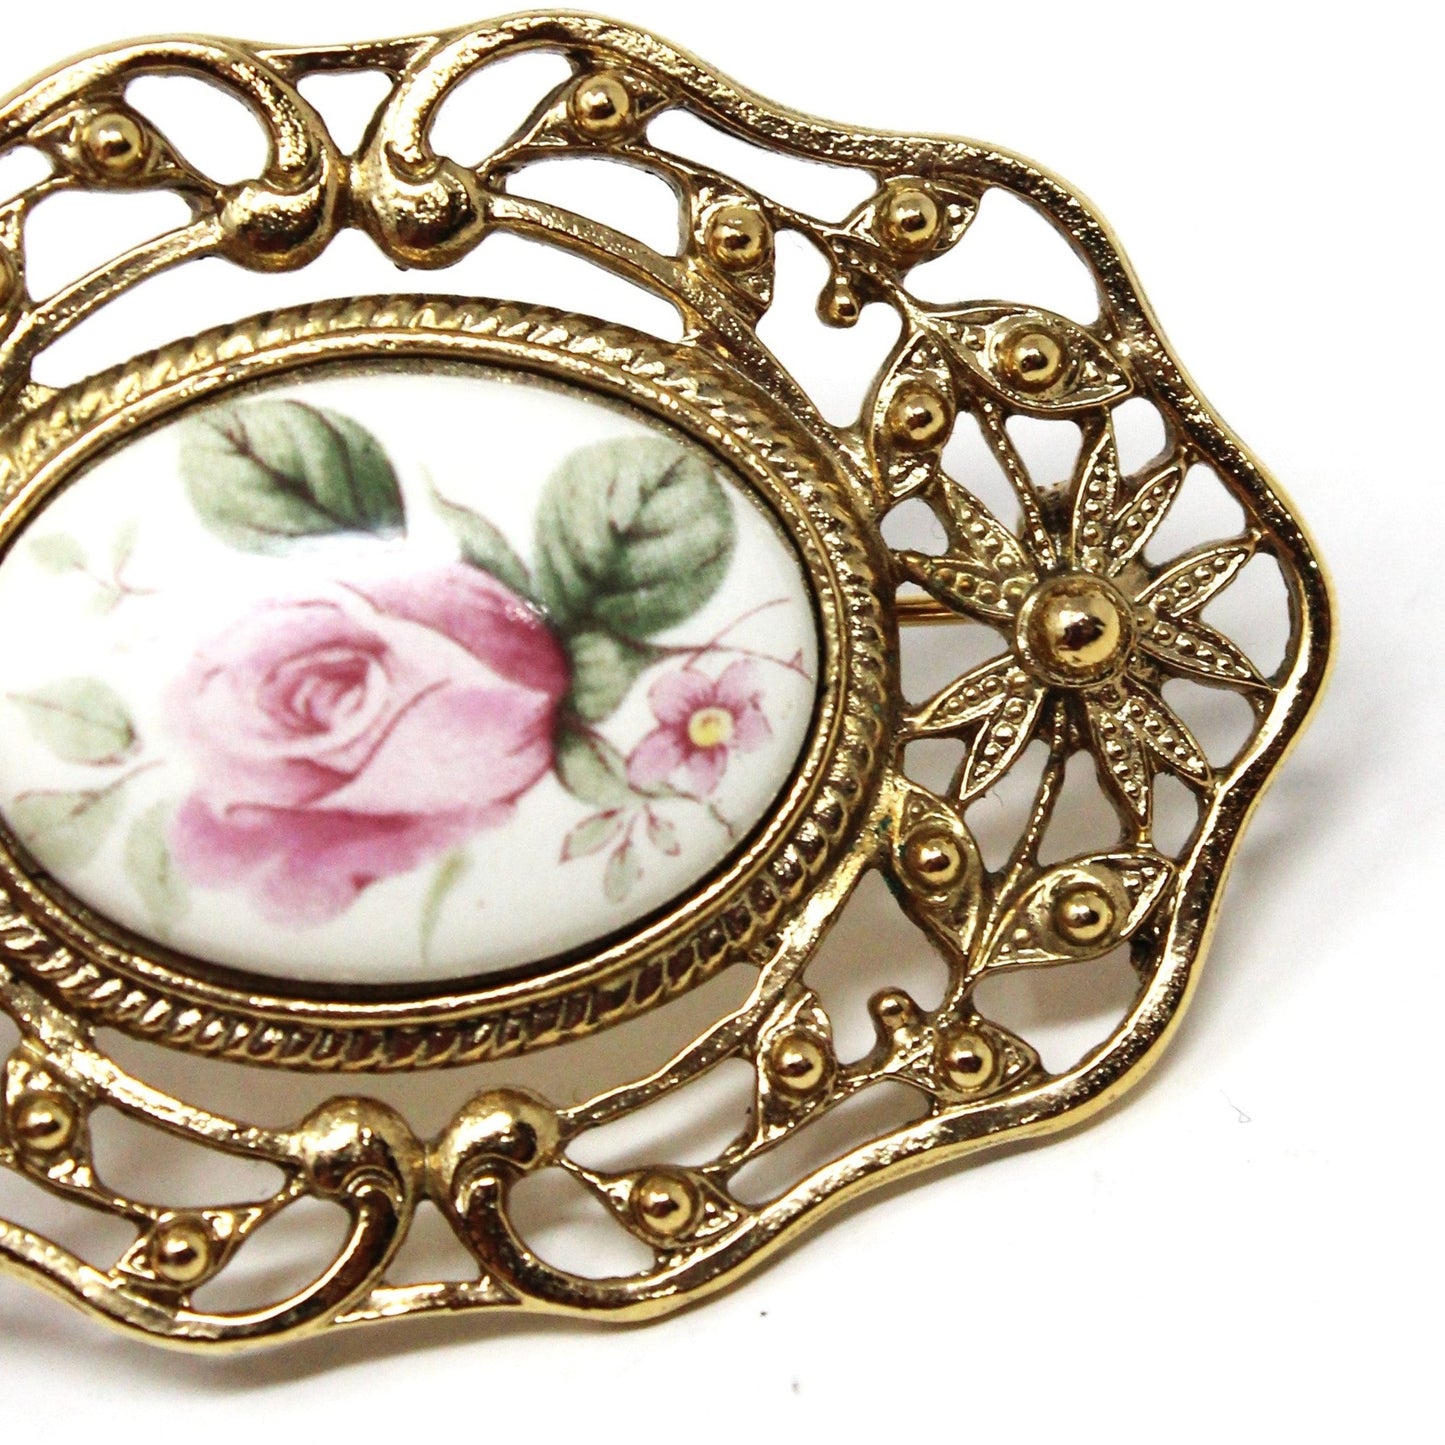 Brooch / Pin, 1928 Jewelry Co, Victorian Style with Pink Rose Porcelain Cameo, Gold Filigree